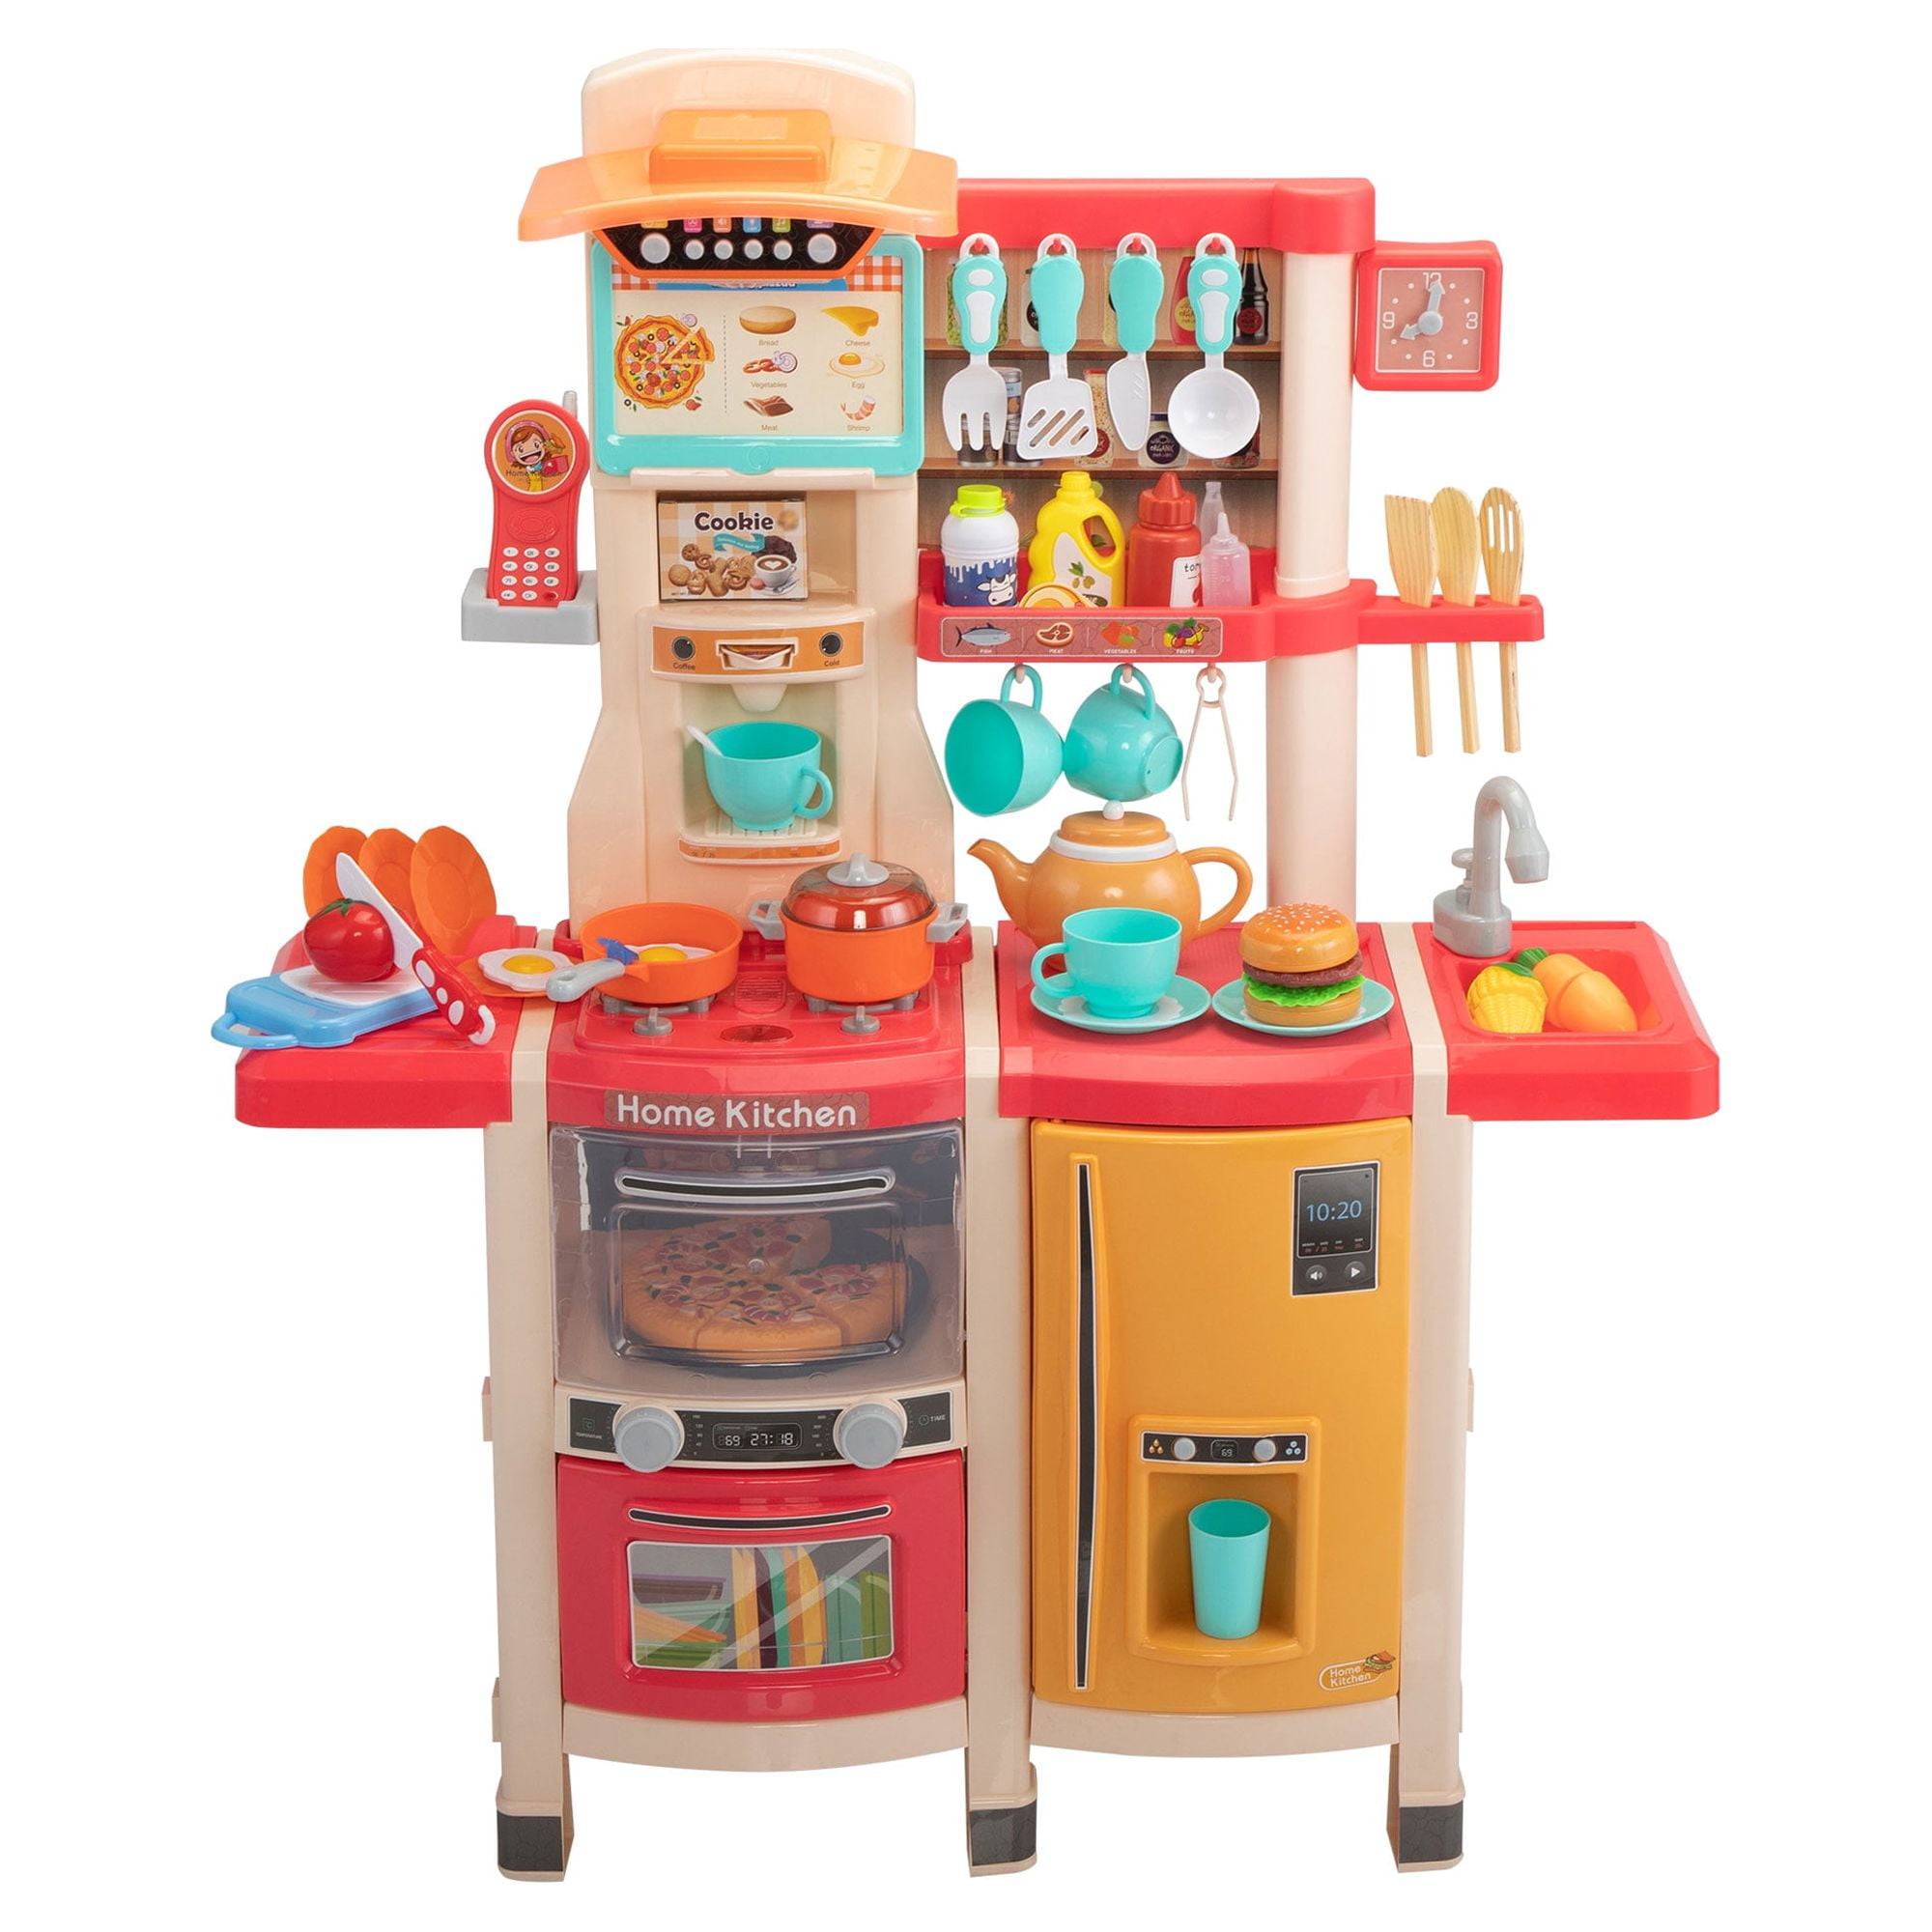 JOYIN 34 Pcs Cooking Toy Set Kitchen Toy Set Toy BBQ Grill Set Little Chef Play Kids Grill Playset Interactive BBQ Toy Set for Kids